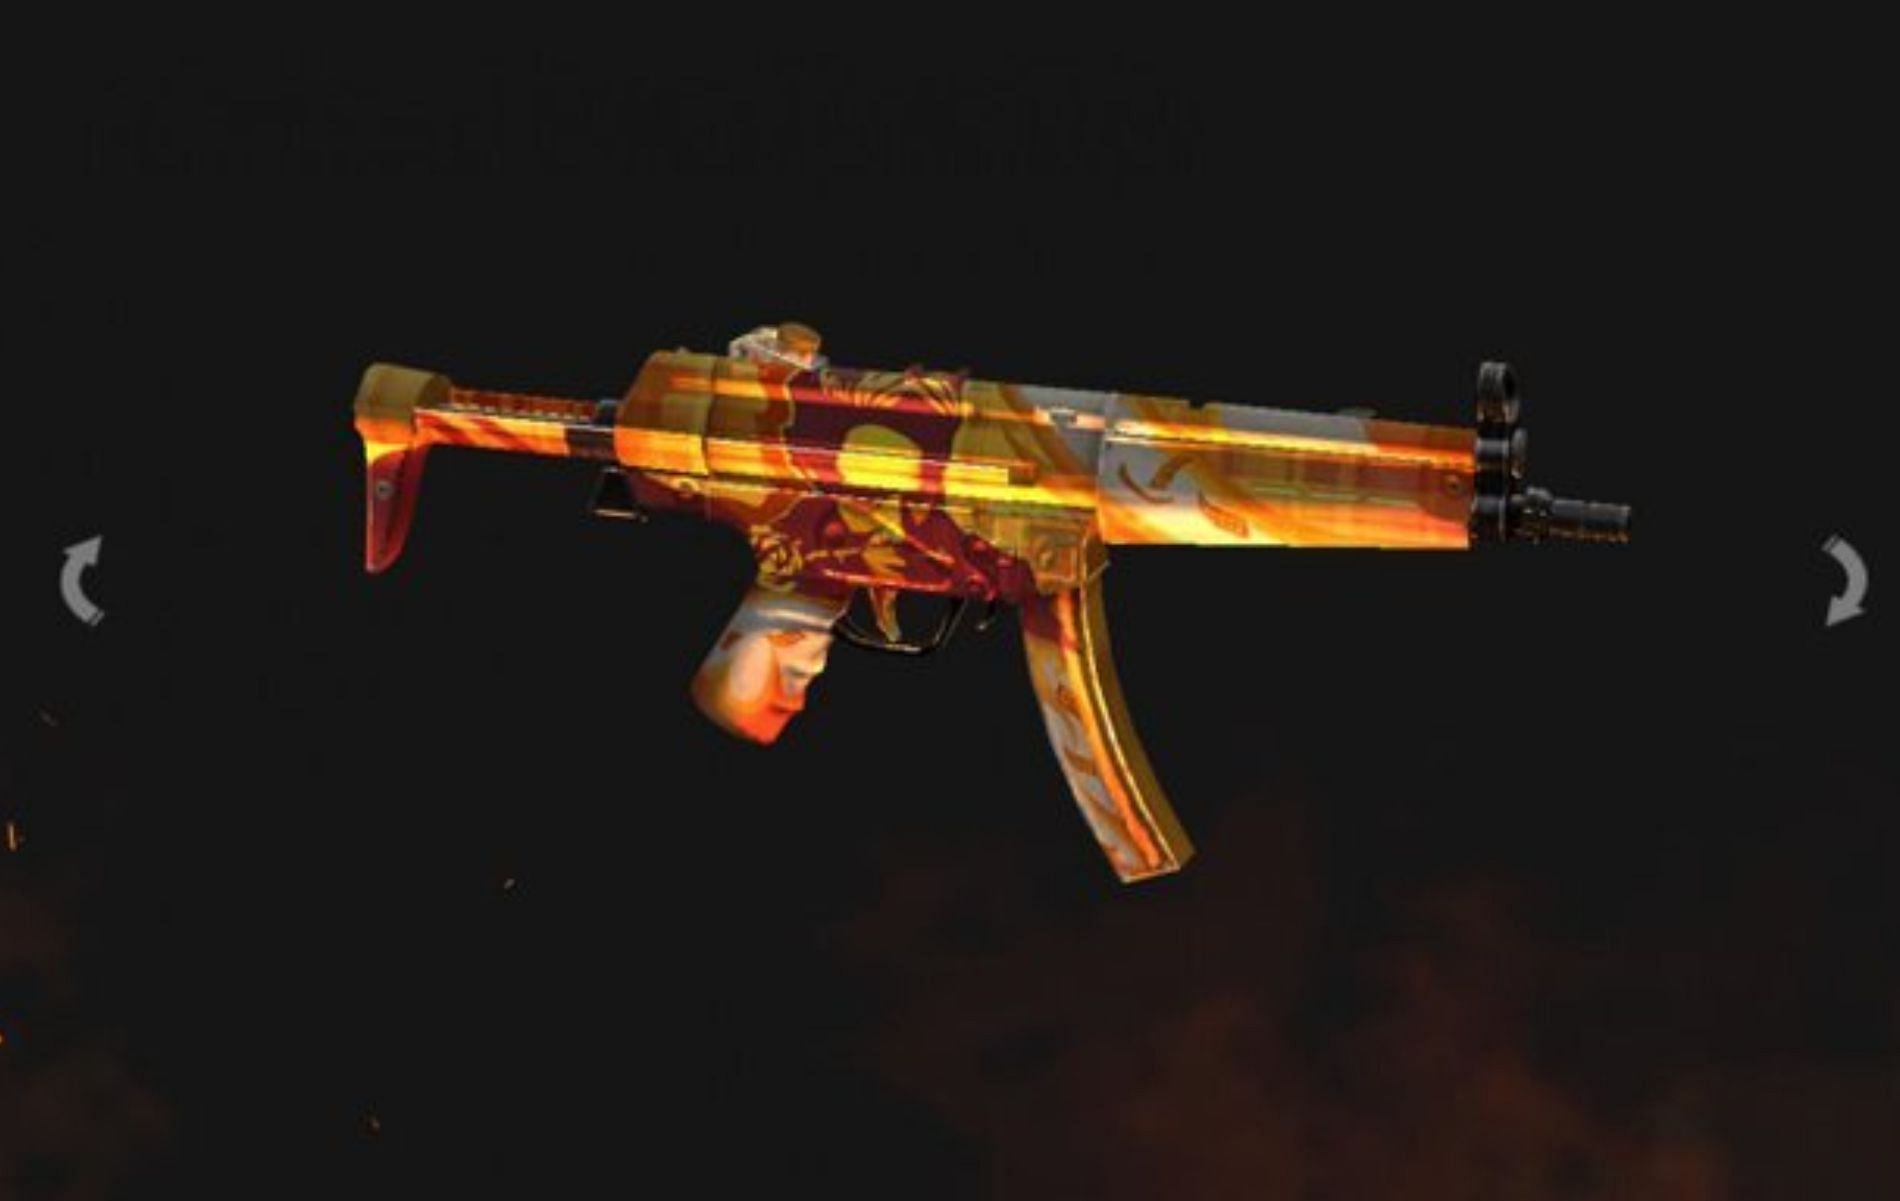 The old-fashioned MP5 skin in Free Fire (Image via 111dots Studio)